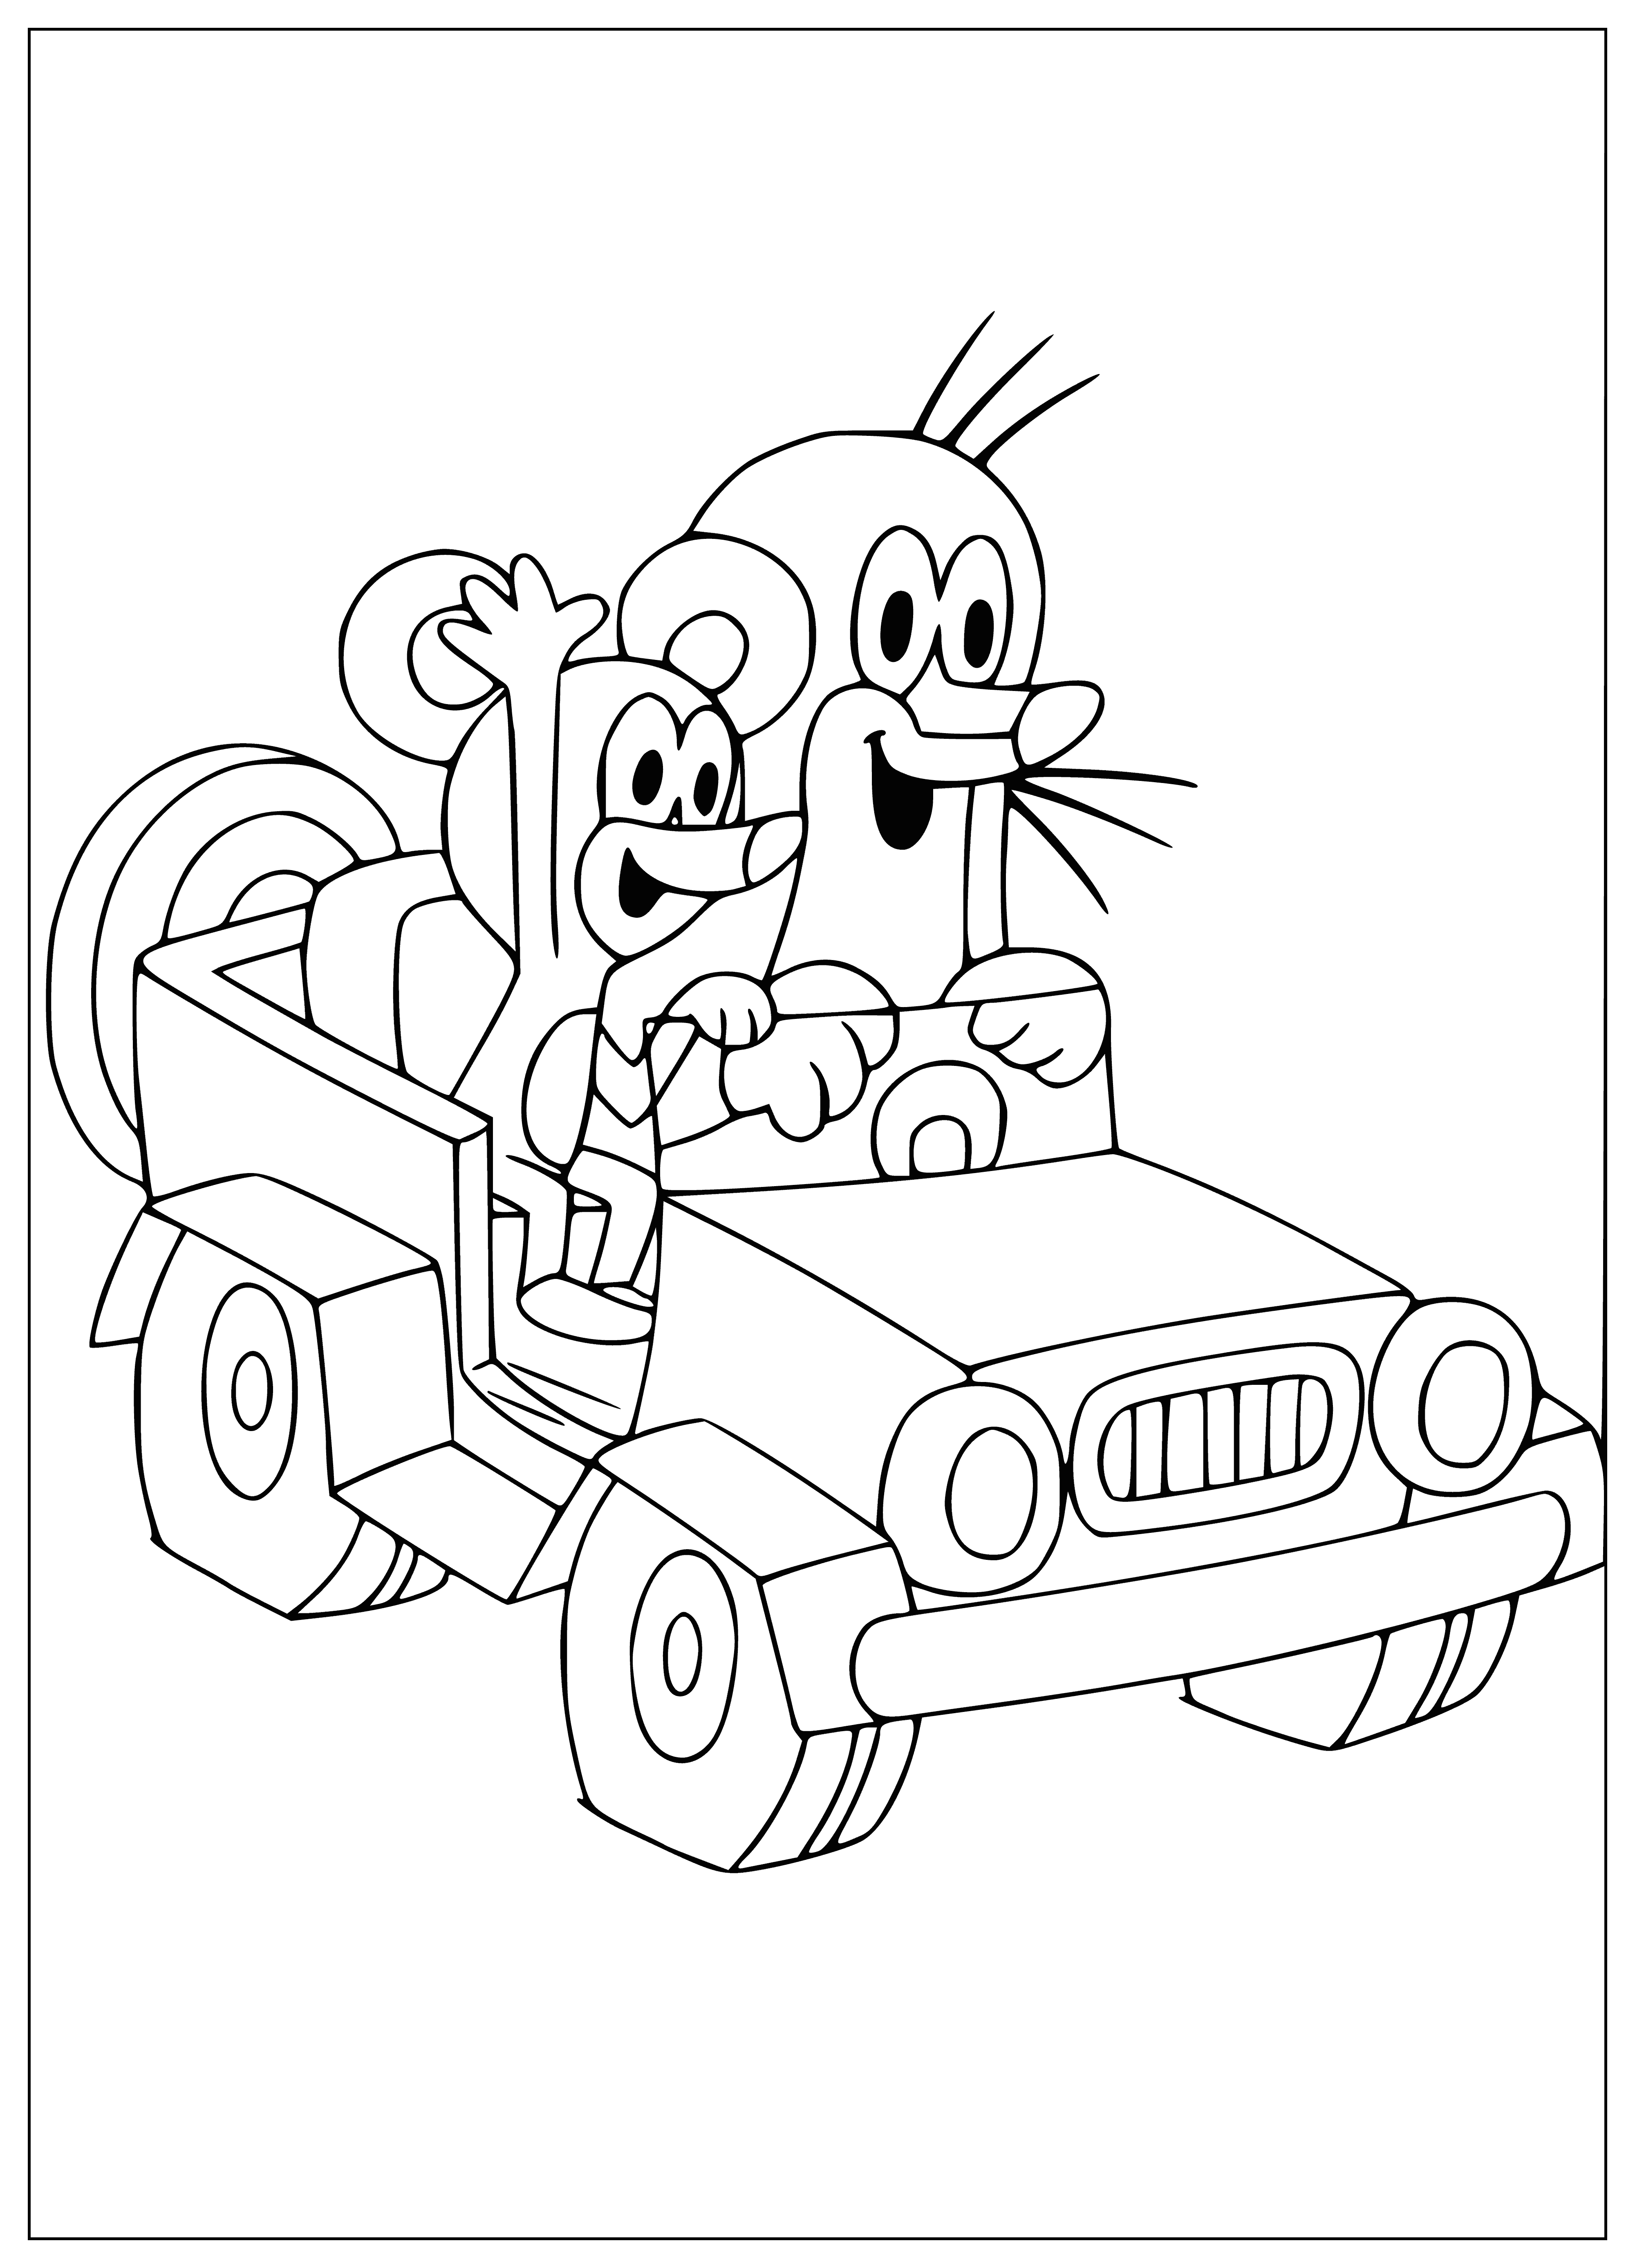 Mole and car coloring page